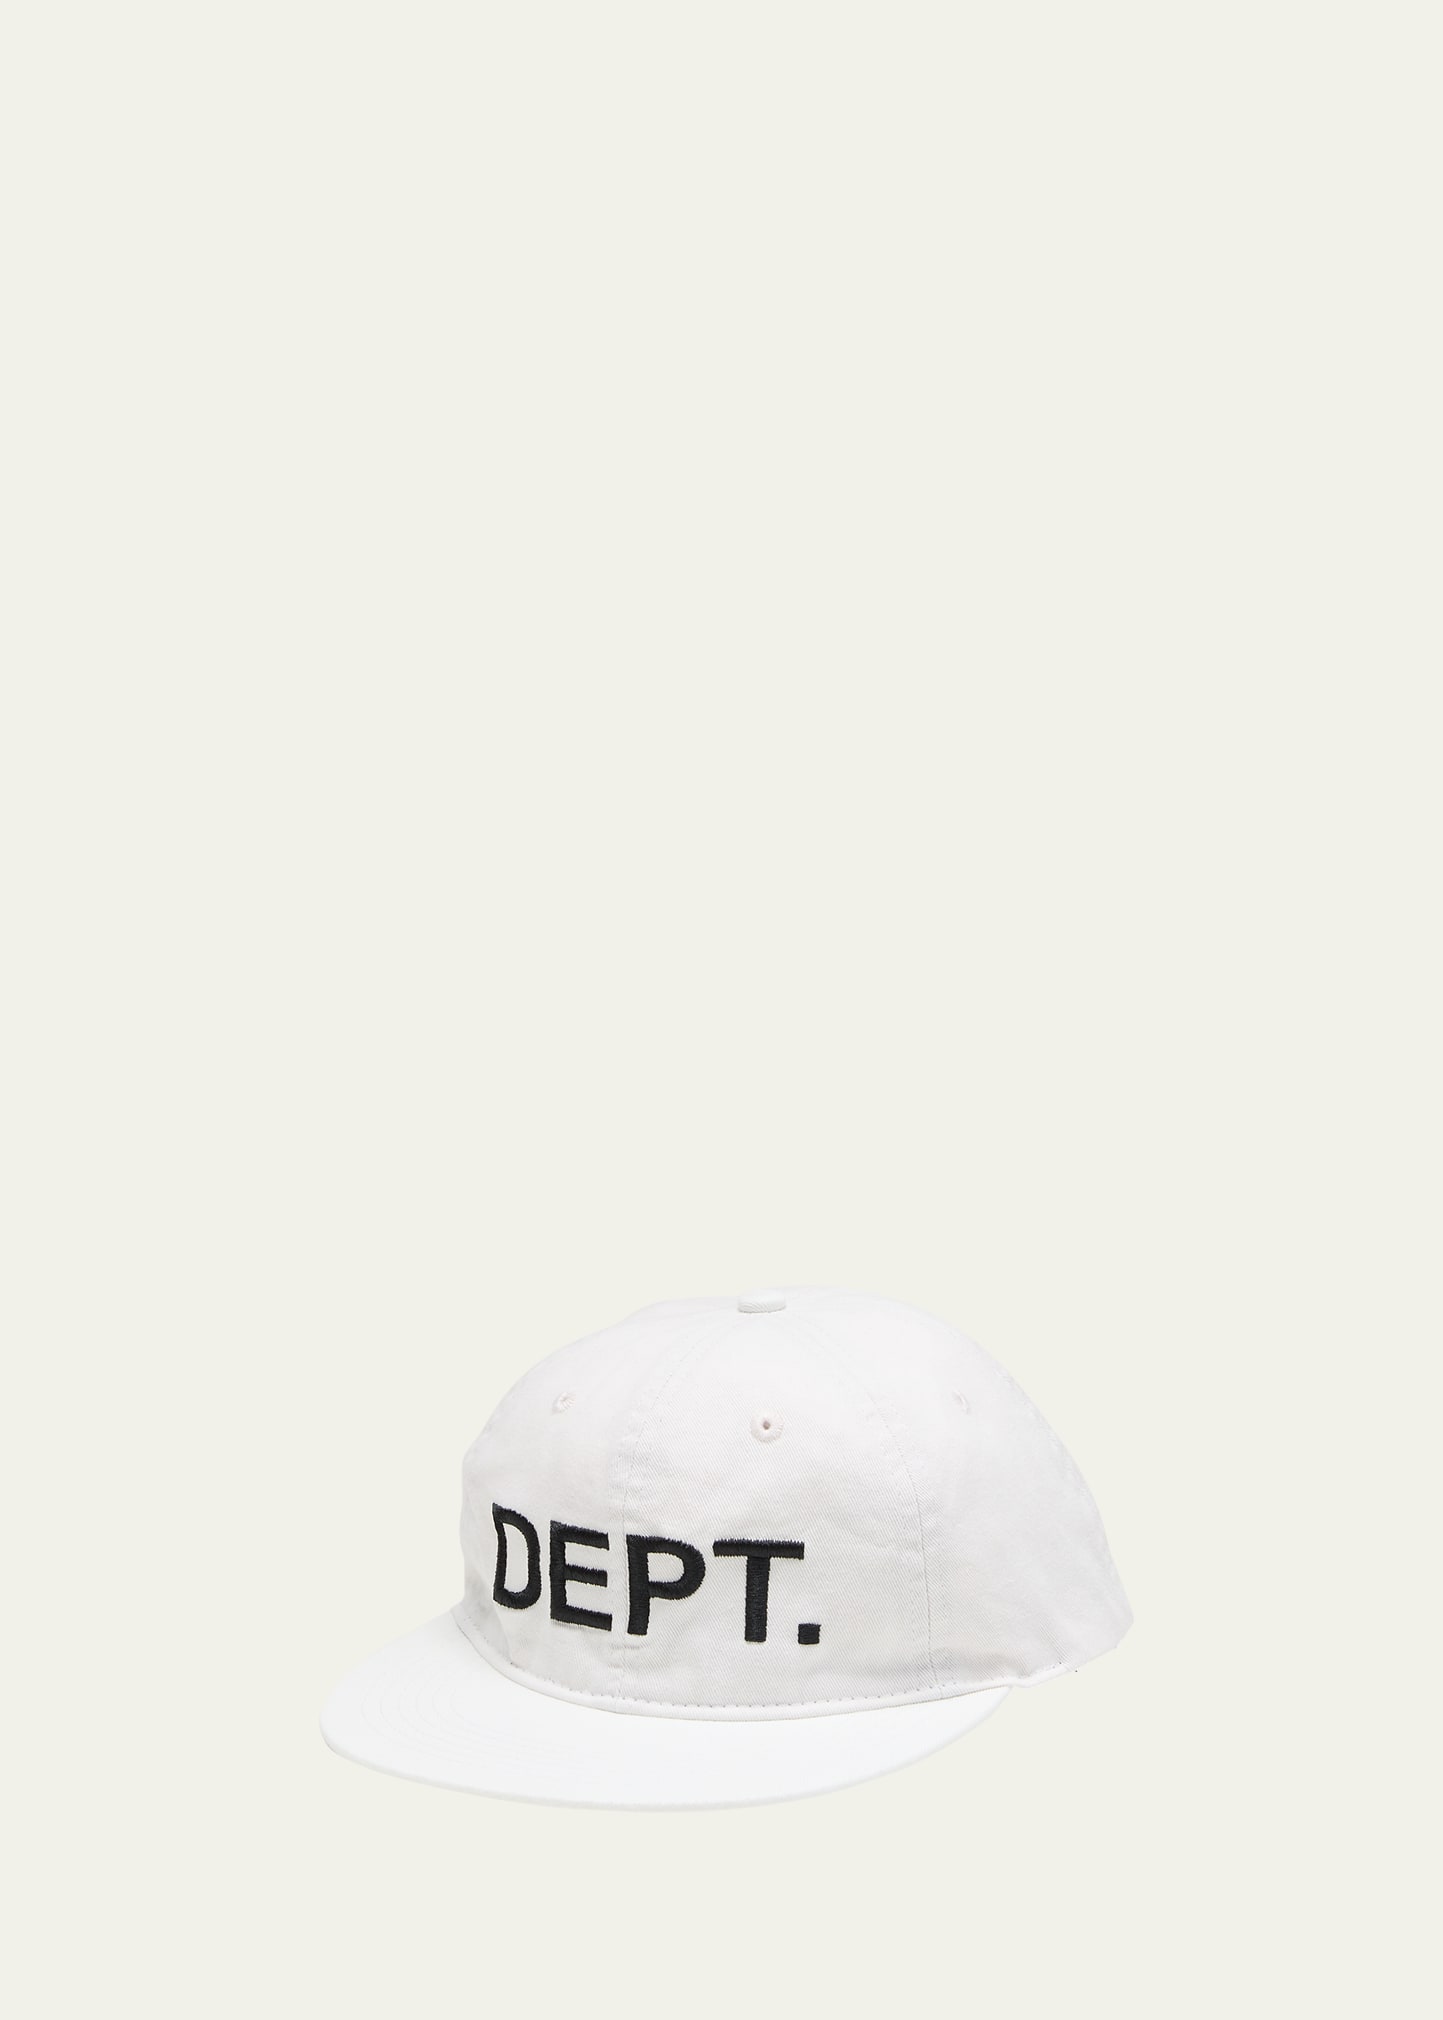 Gallery Department Men's Dept Embroidered Baseball Cap In White